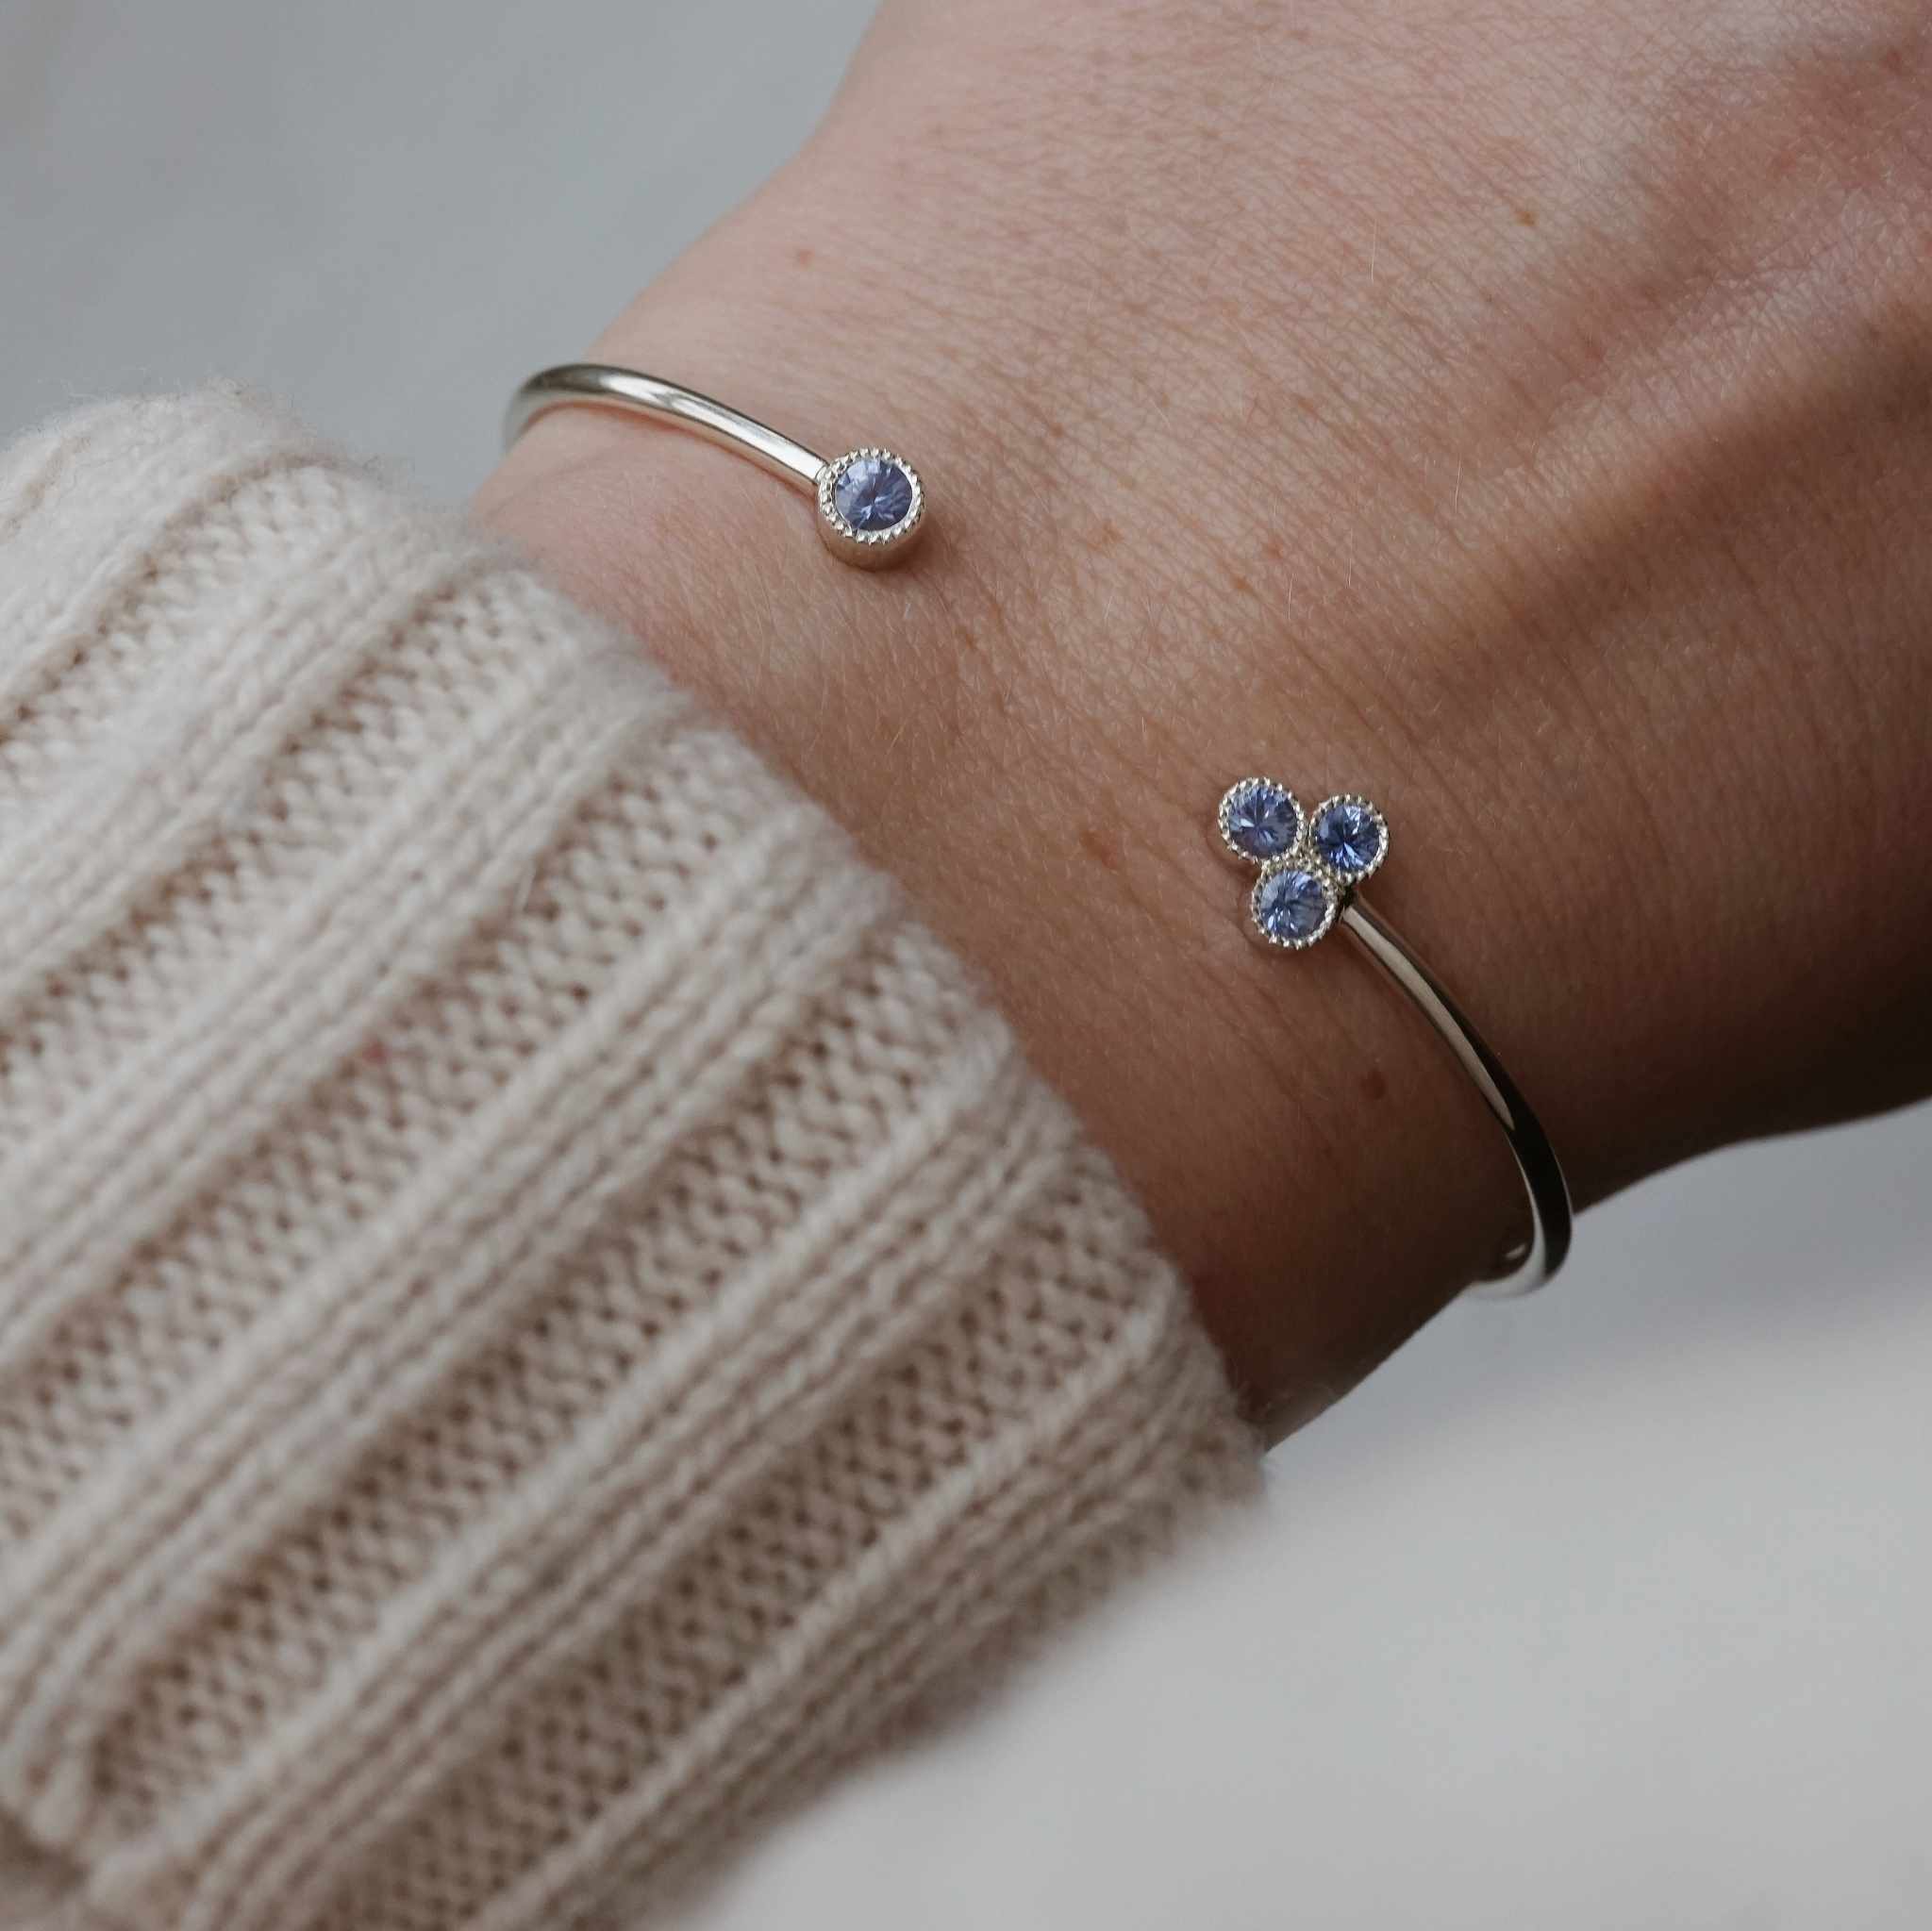 "Twinkle" bangle in silver with light blue sapphires